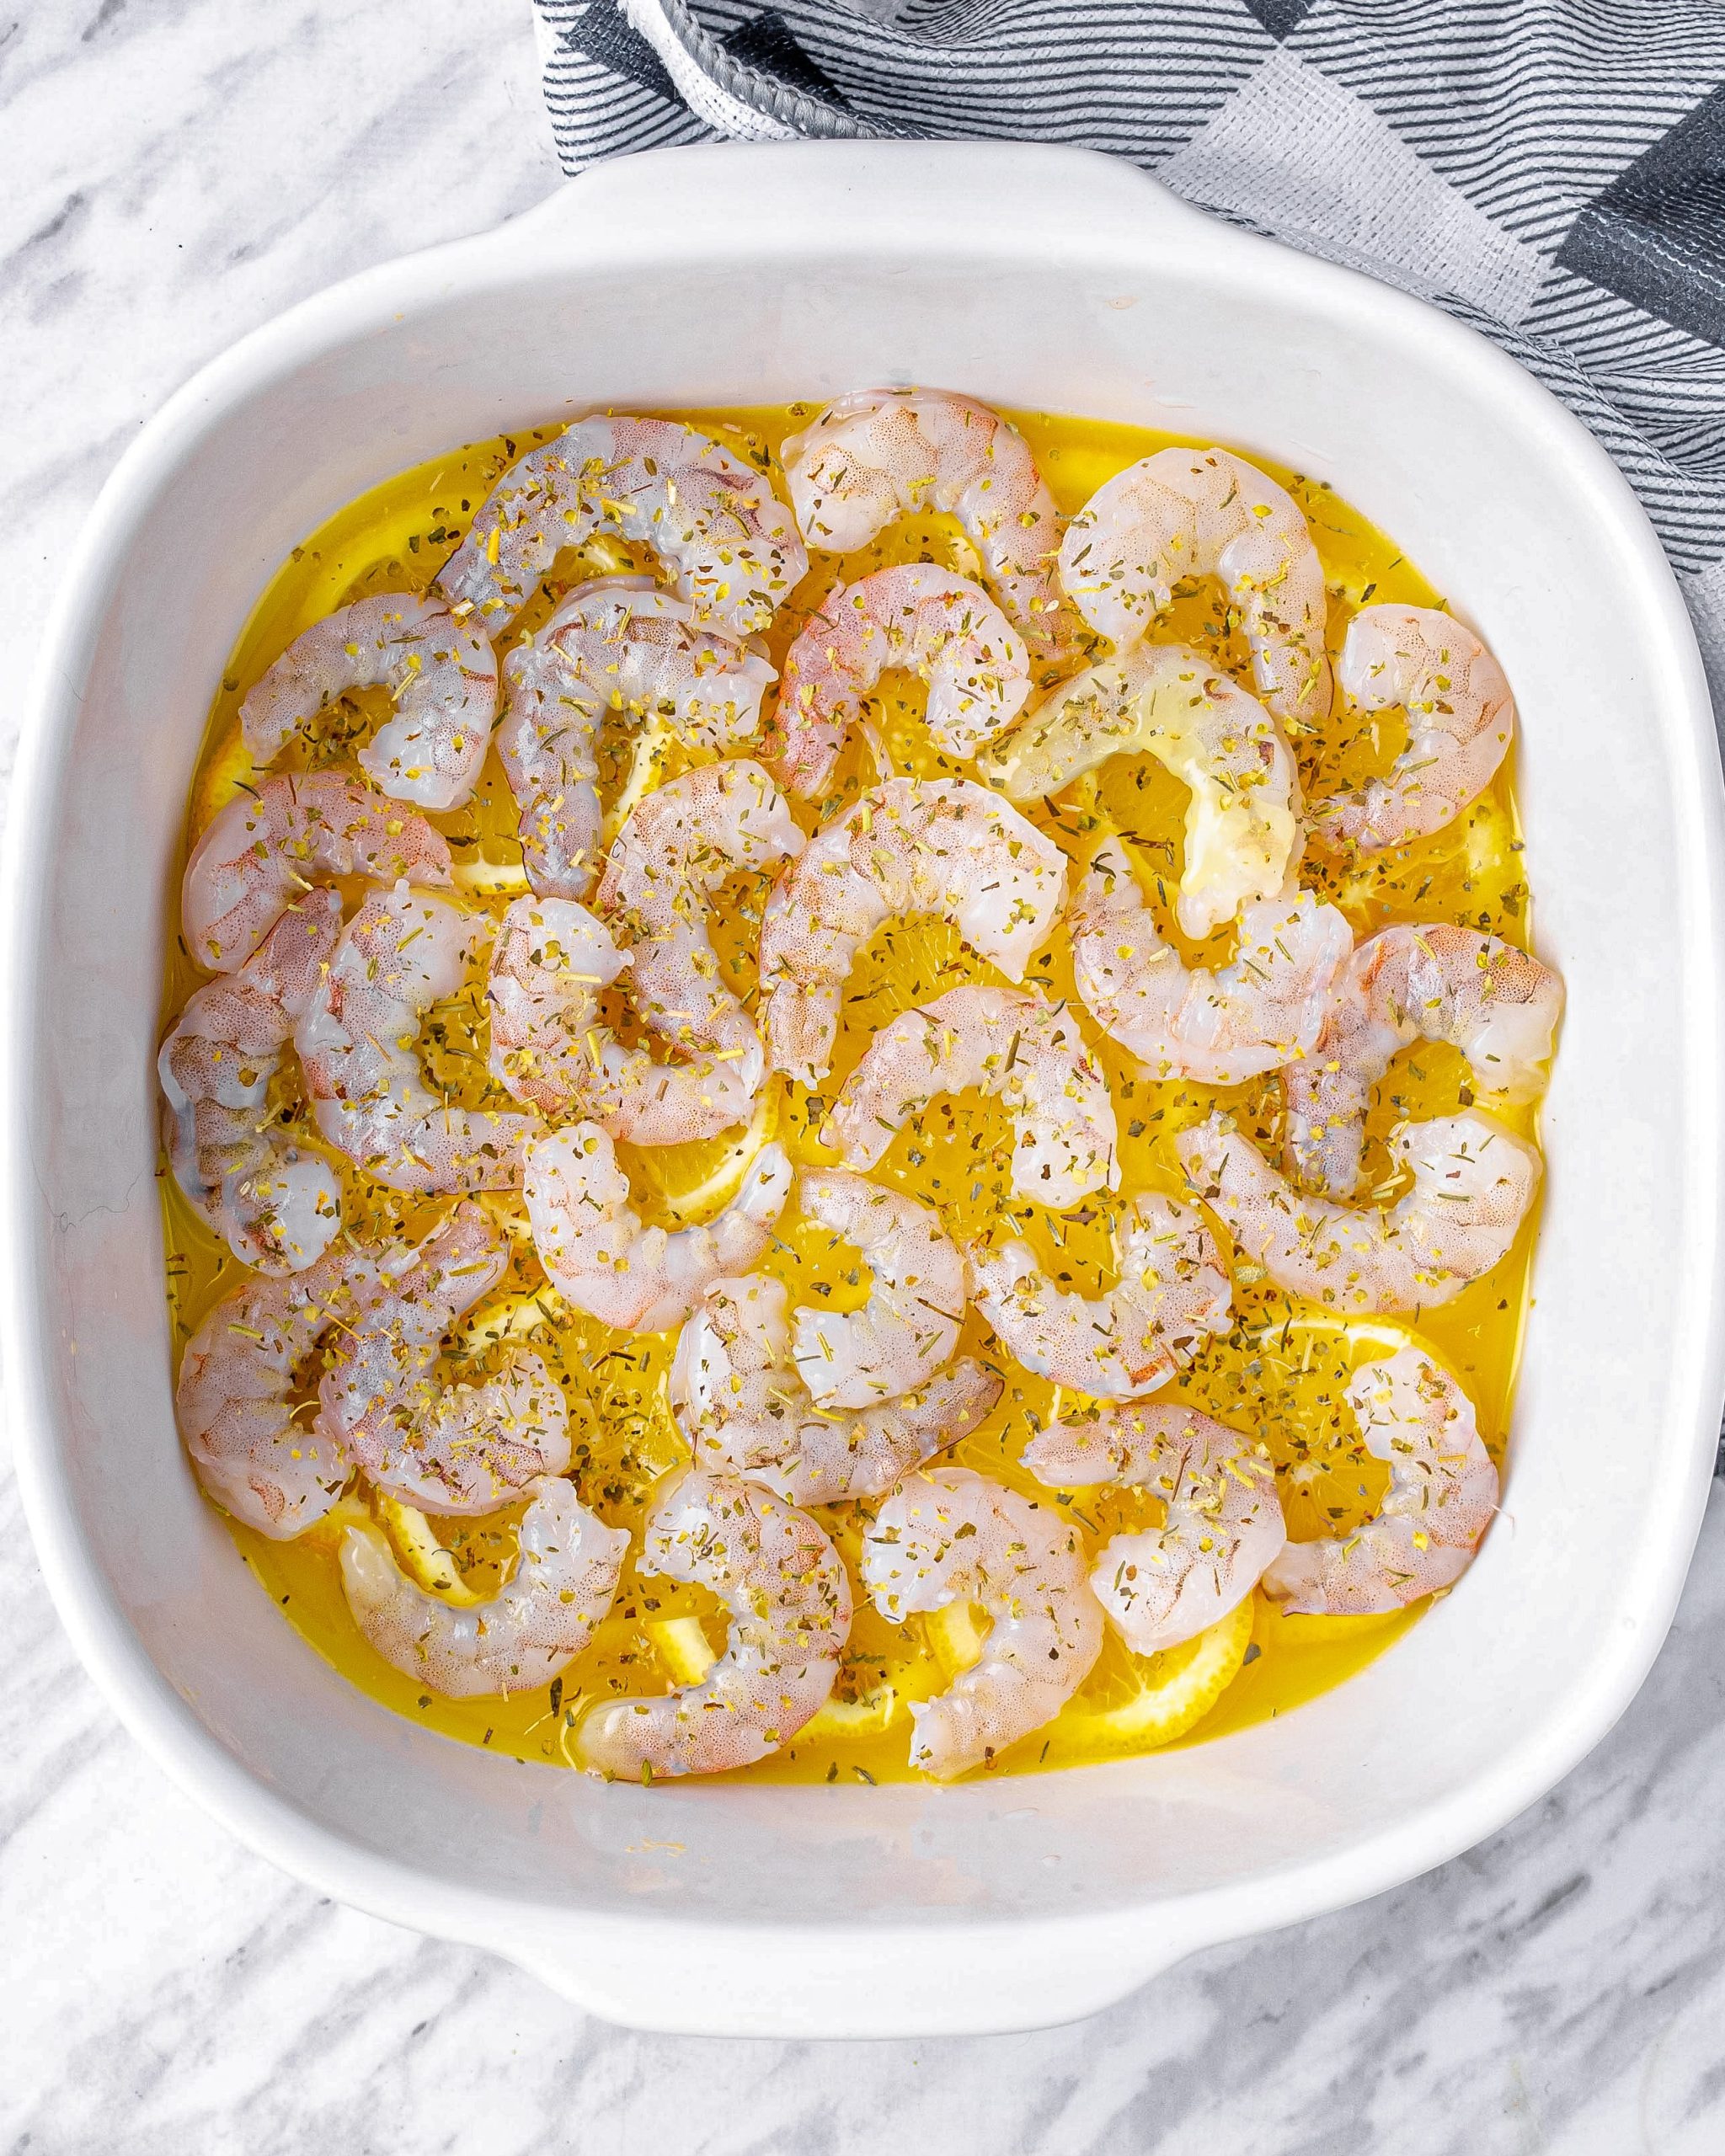 Arrange the cleaned and deveined shrimp on top of the lemon slices.